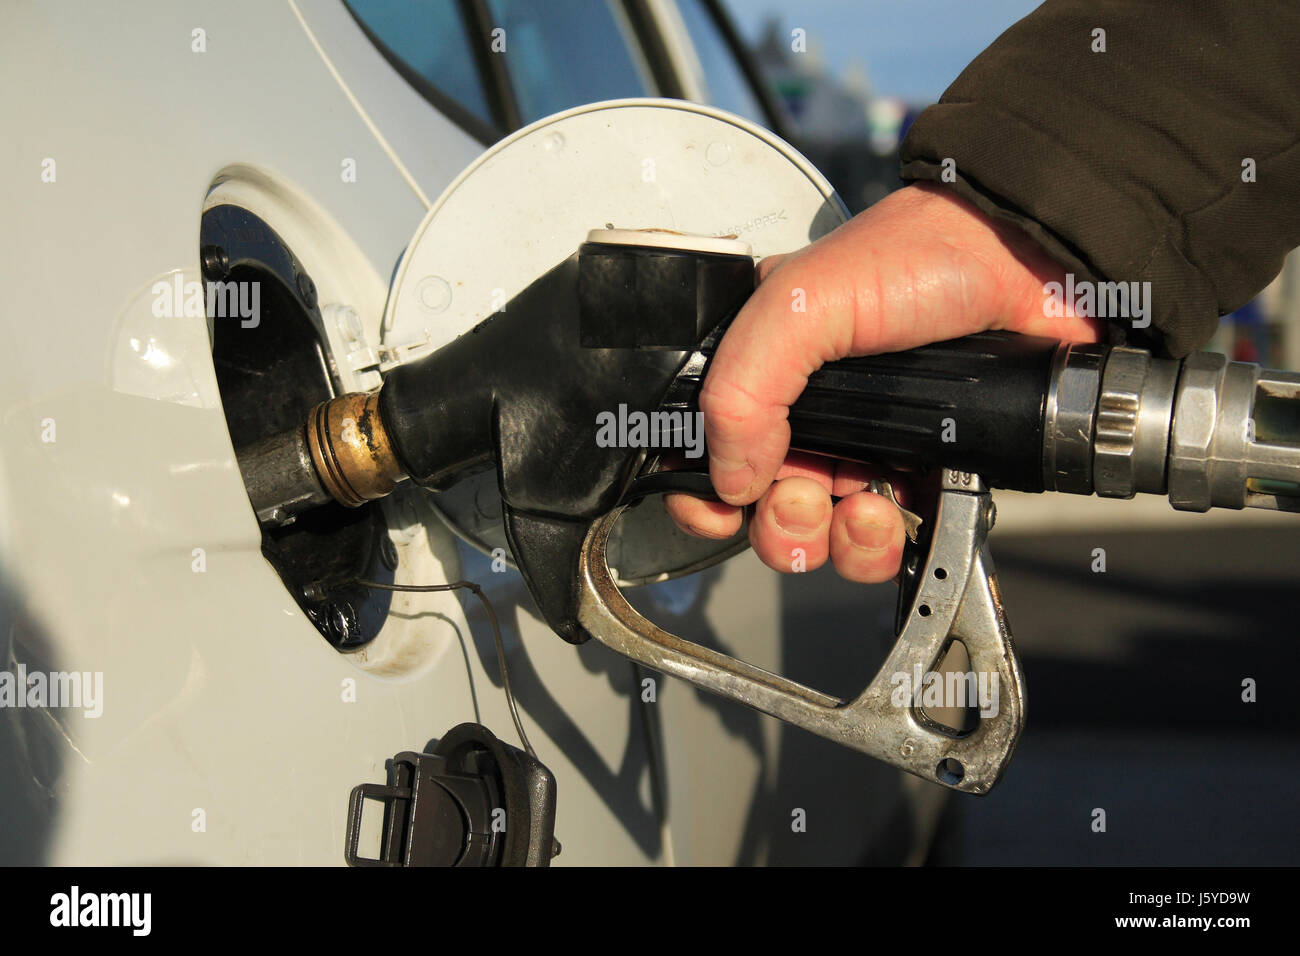 station fuel petrol full reservoir hand service station car automobile vehicle Stock Photo